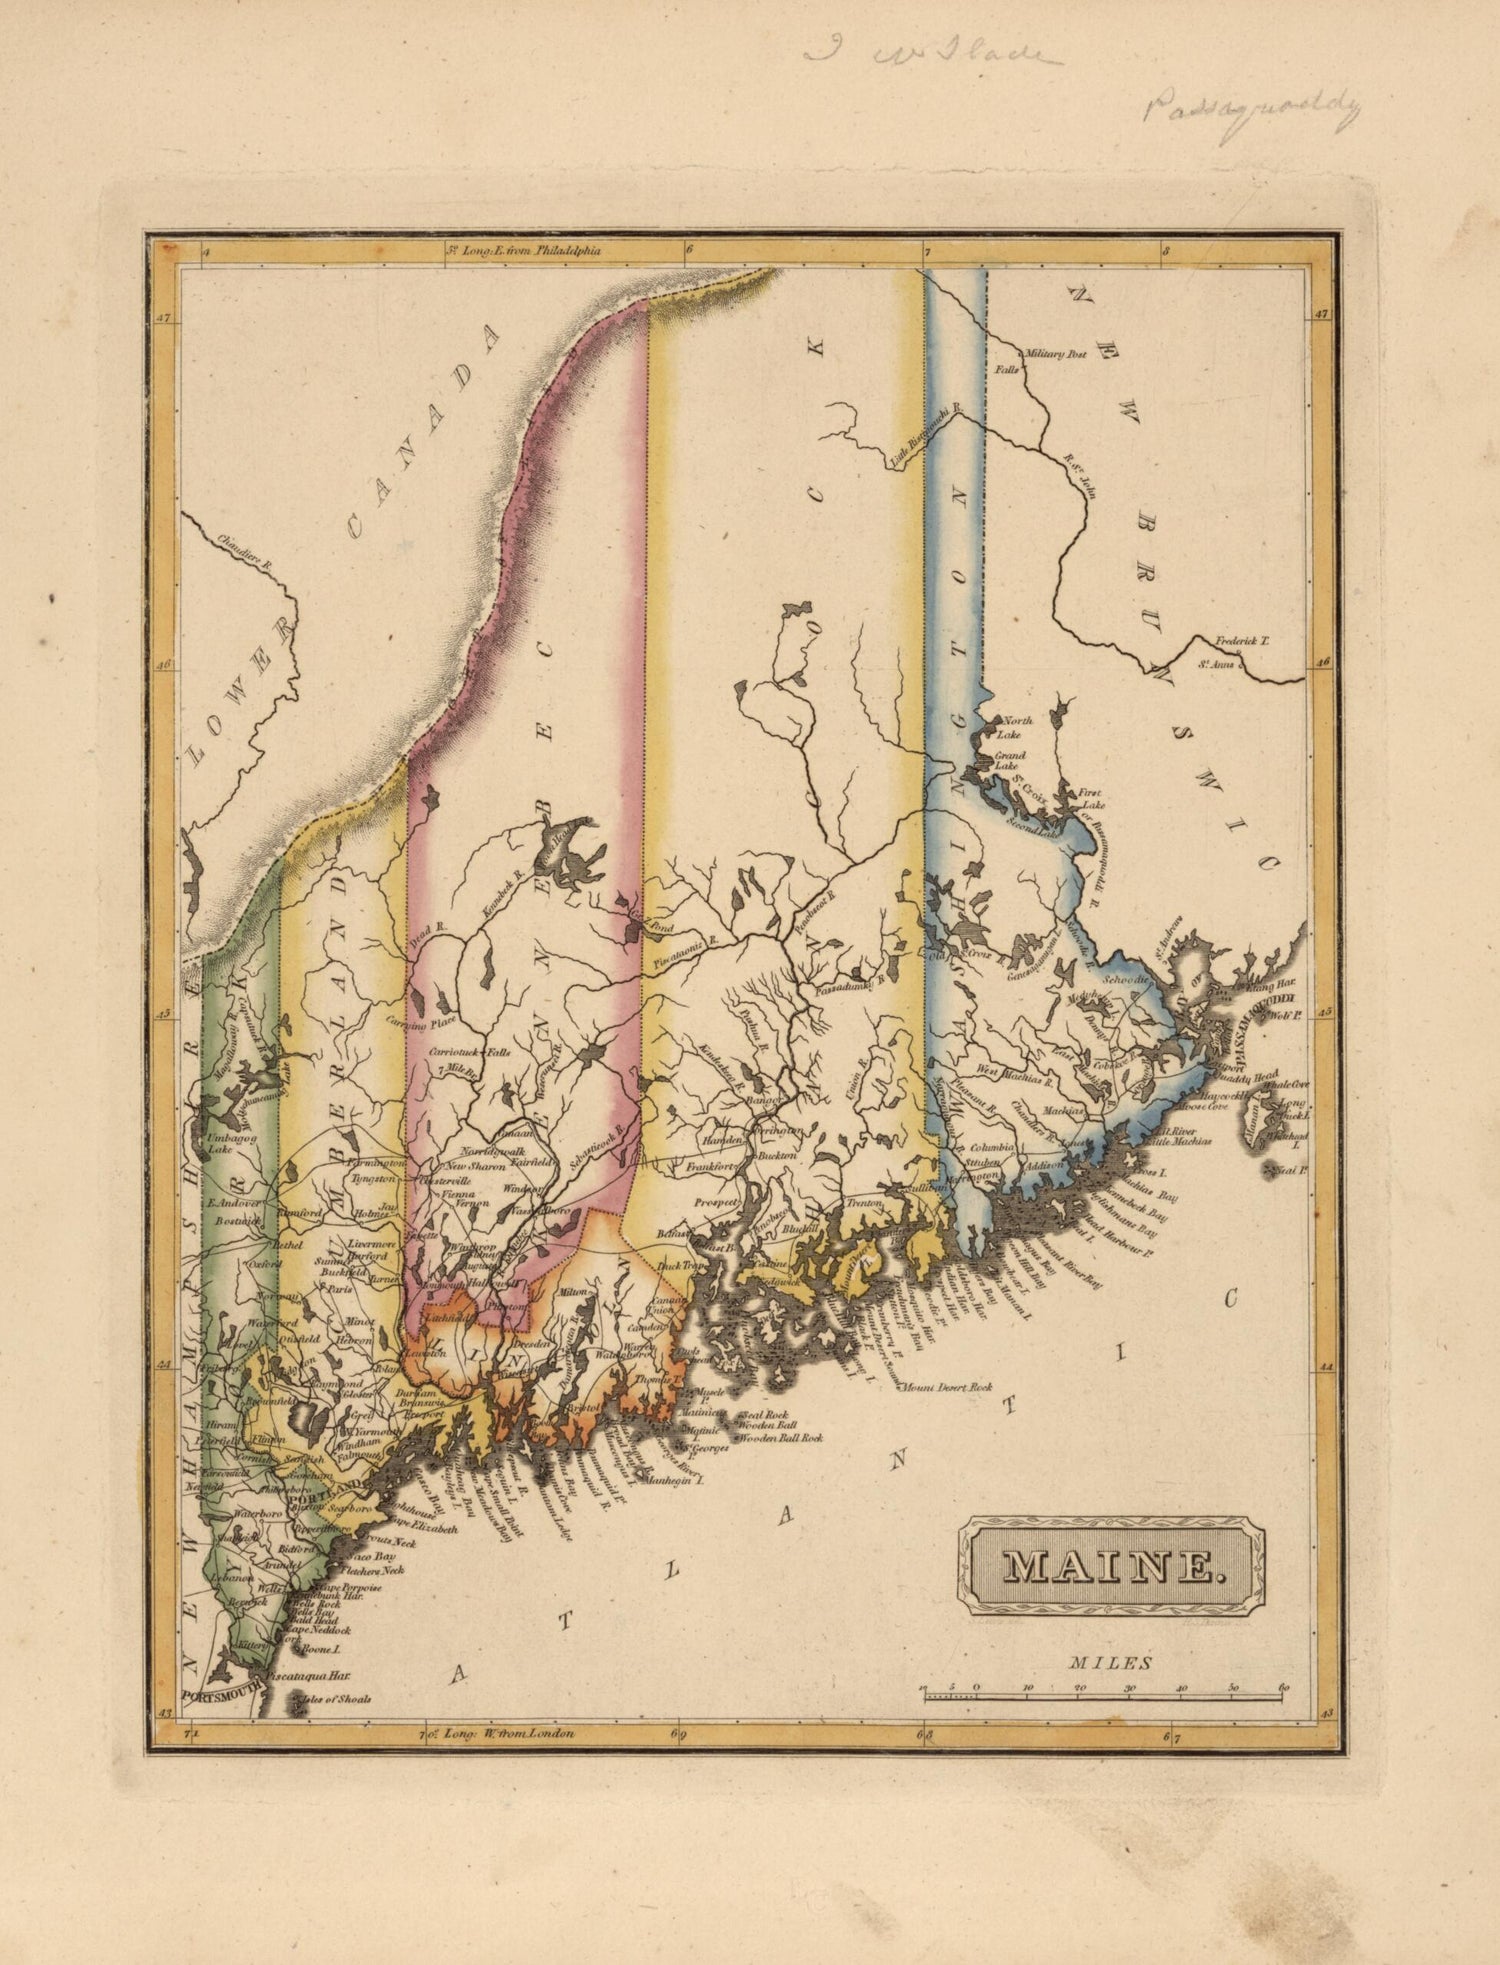 This old map of Maine from a New and Elegant General Atlas, Containing Maps of Each of the United States. from 1817 was created by Henry Schenck Tanner in 1817